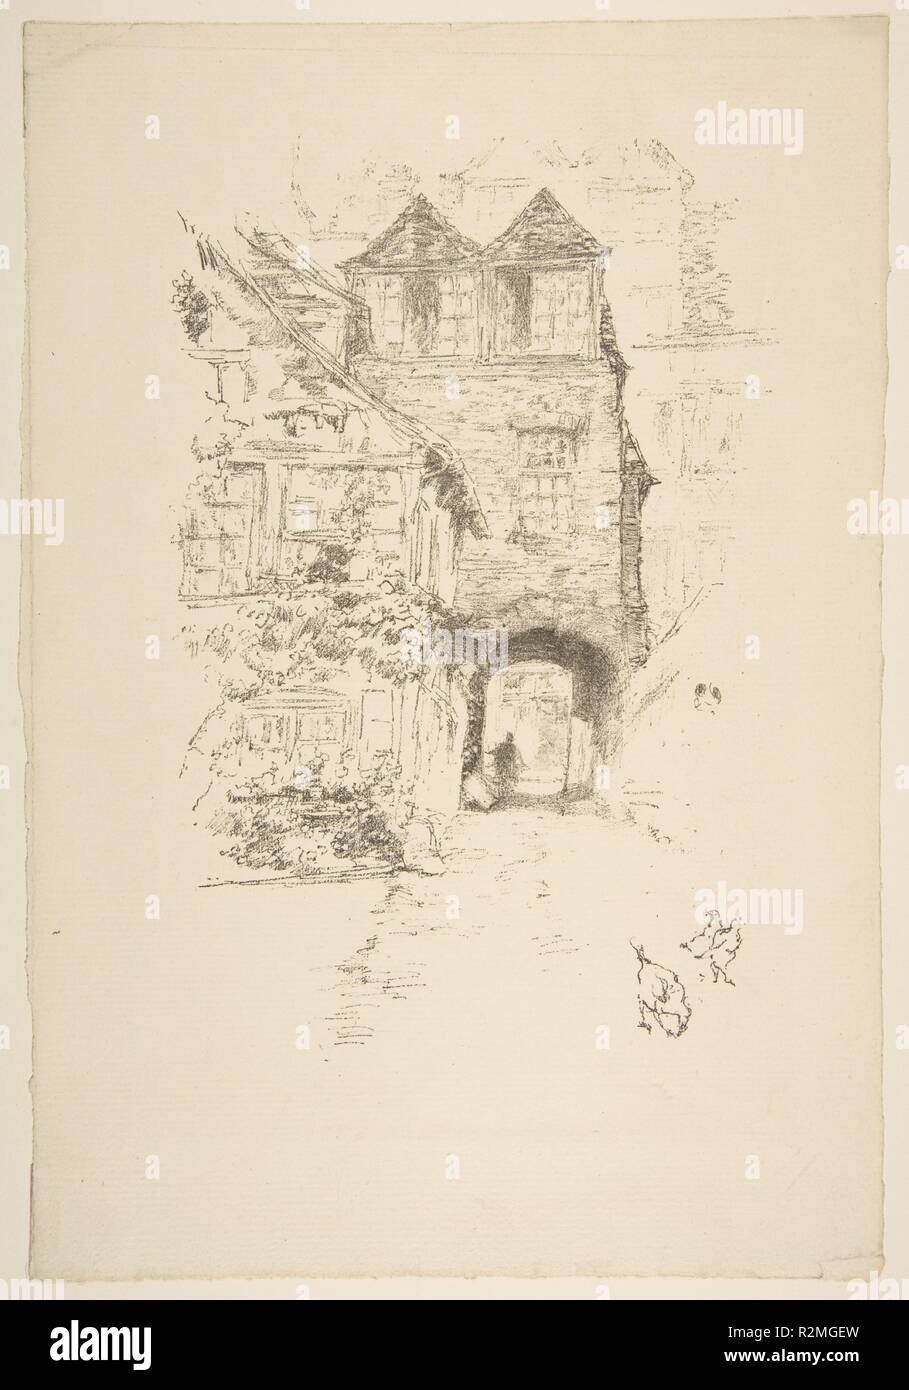 The Priest's House, Rouen. Artist: James McNeill Whistler (American, Lowell, Massachusetts 1834-1903 London). Dimensions: Image: 9 1/16 × 6 1/8 in. (23 × 15.6 cm)  Sheet: 12 13/16 × 8 11/16 in. (32.5 × 22 cm). Date: 1894-95. Museum: Metropolitan Museum of Art, New York, USA. Stock Photo